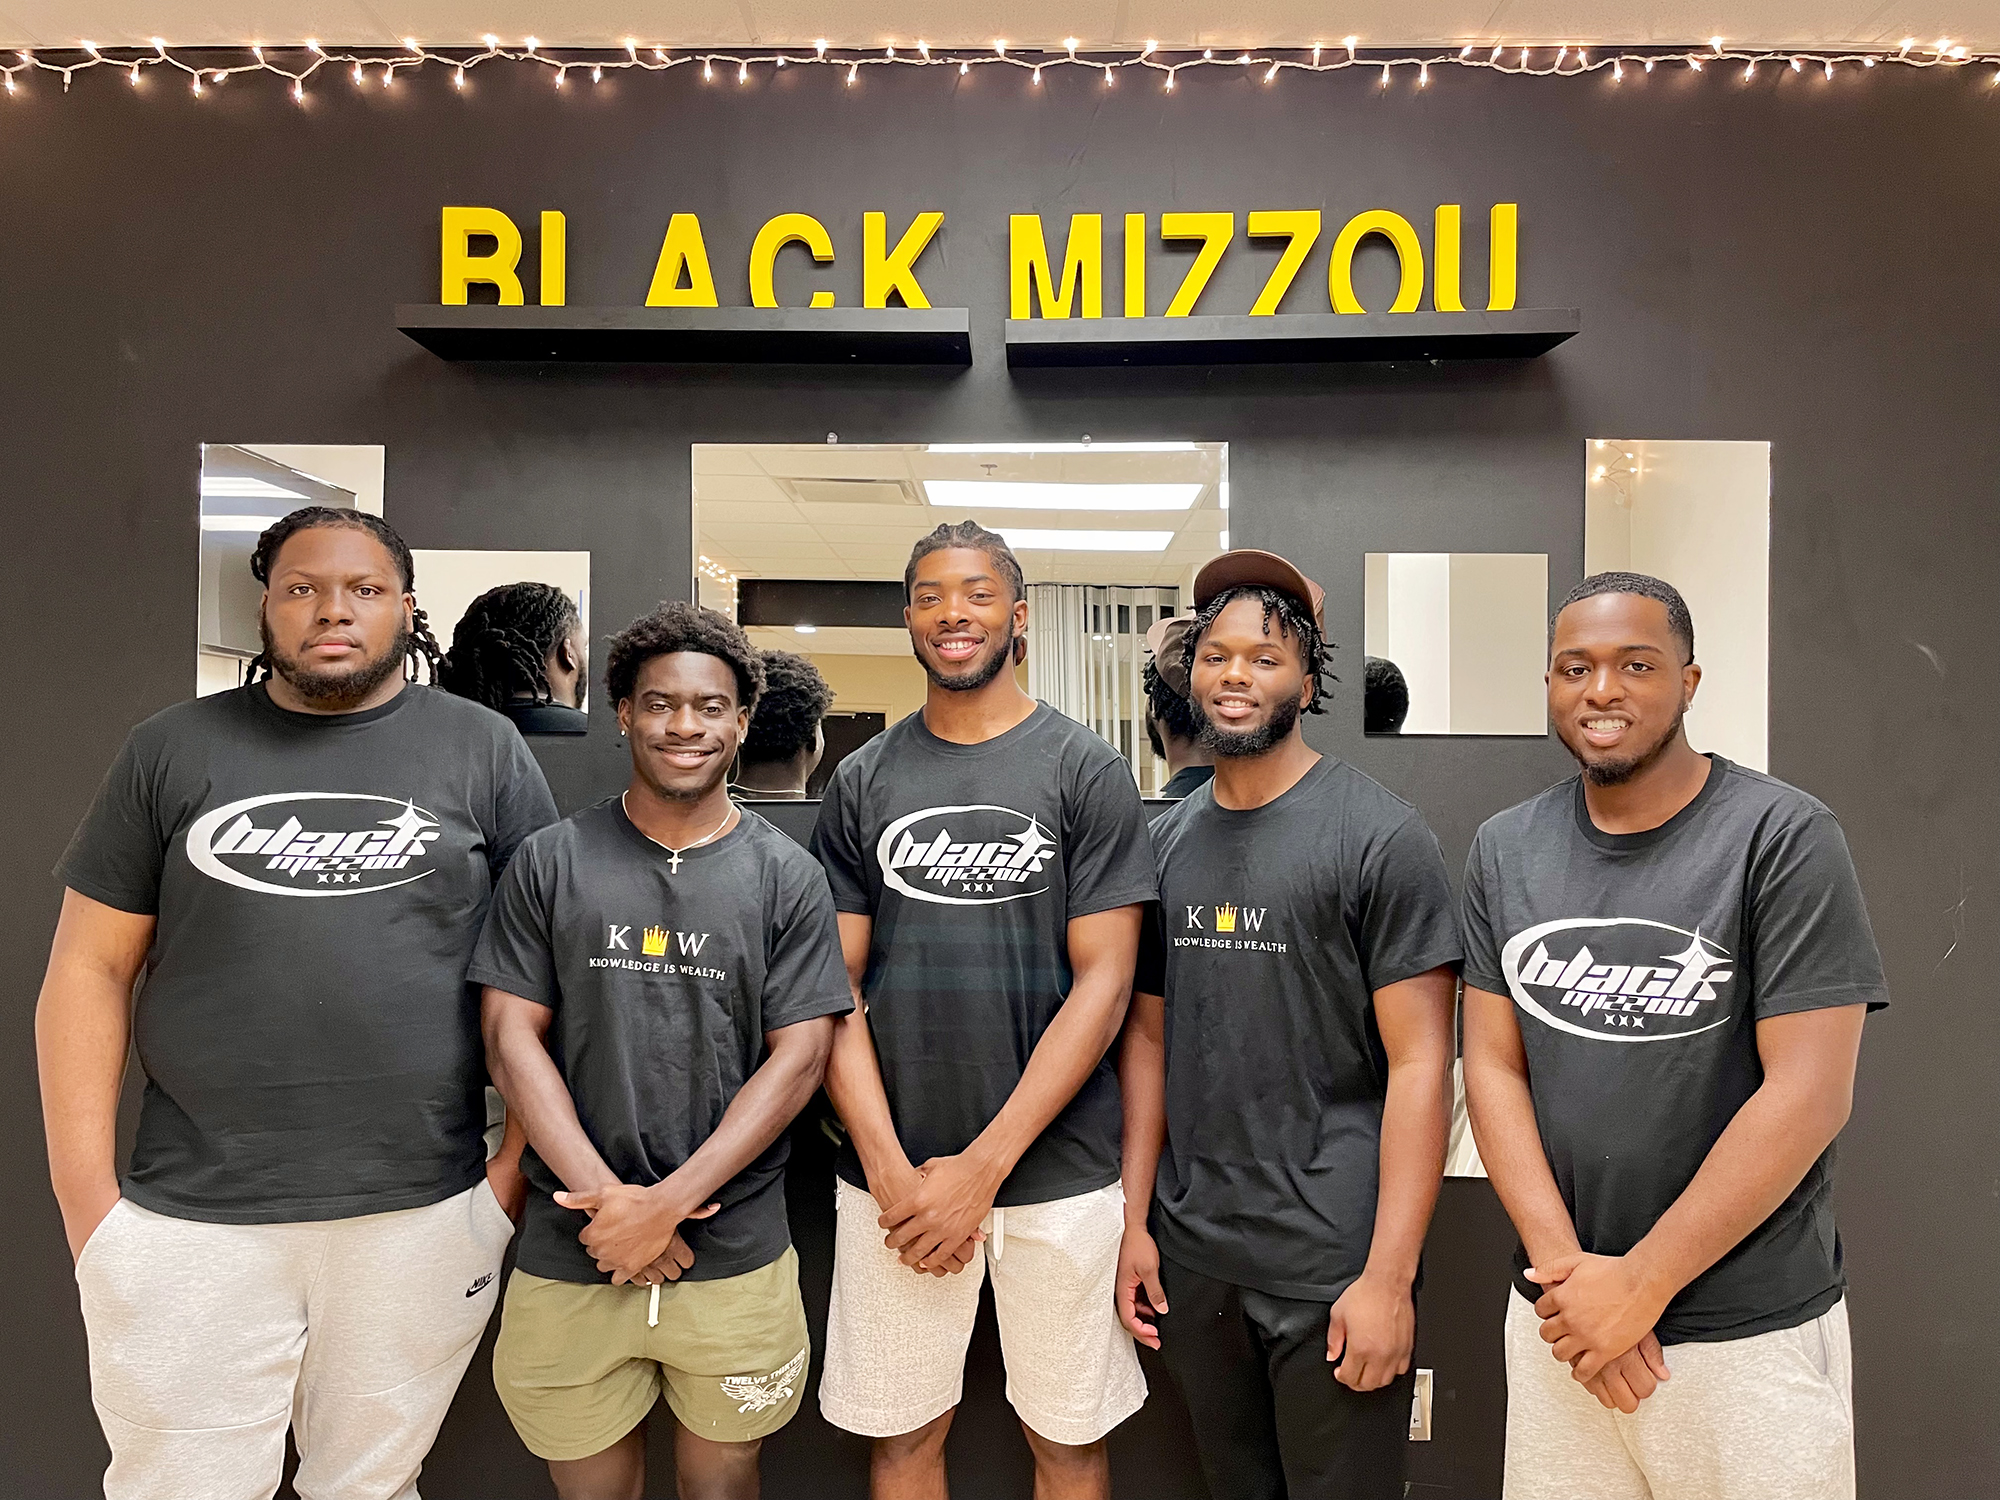 a group of five men stand in front of a "black mizzou" sign